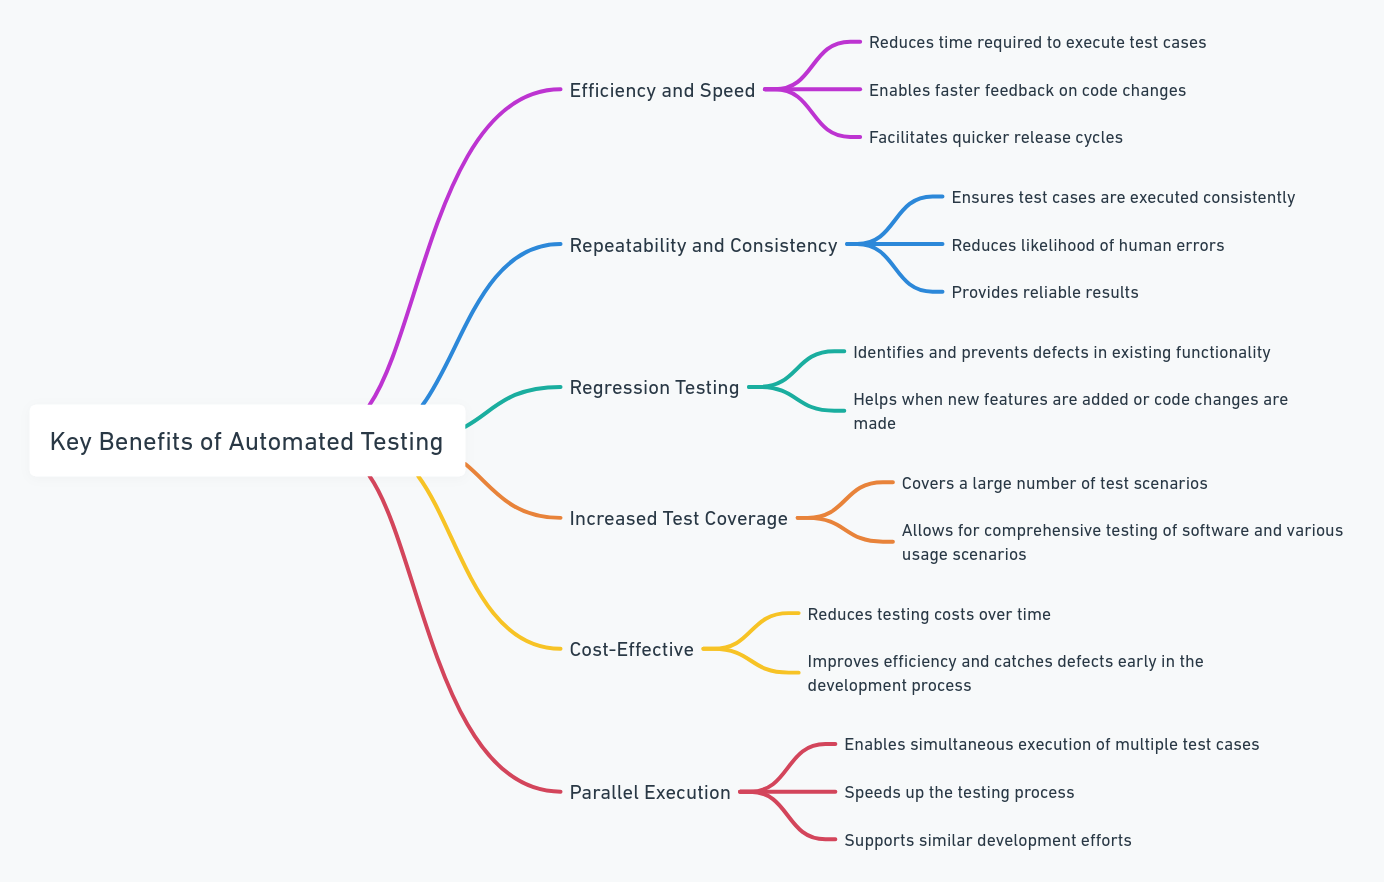 Key Benefits of Automated Software Testing